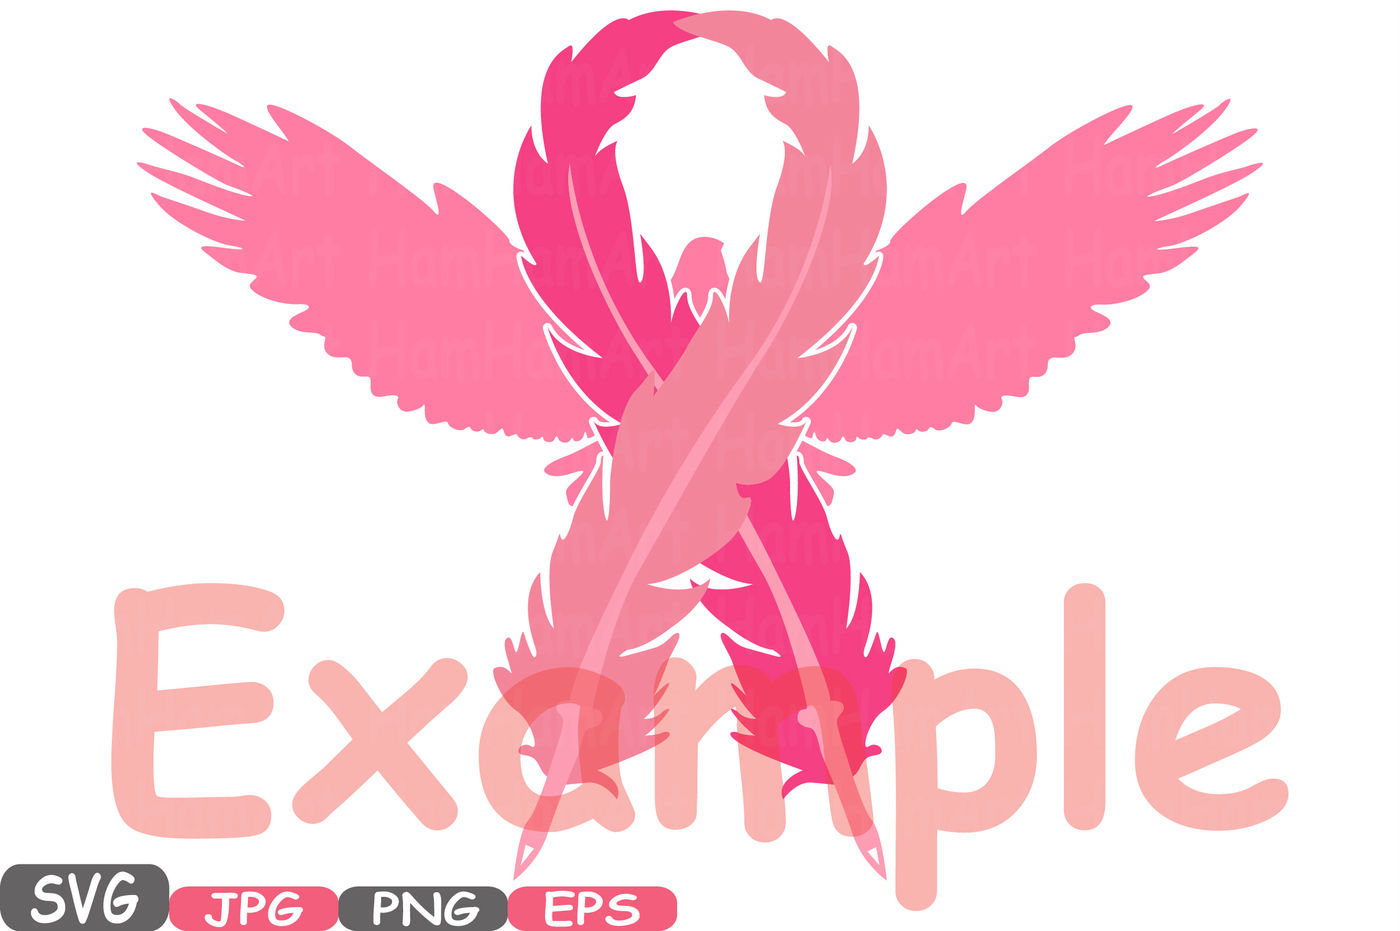 Download Eagle Flower Breast Cancer birds Feathers SVG Cricut ...